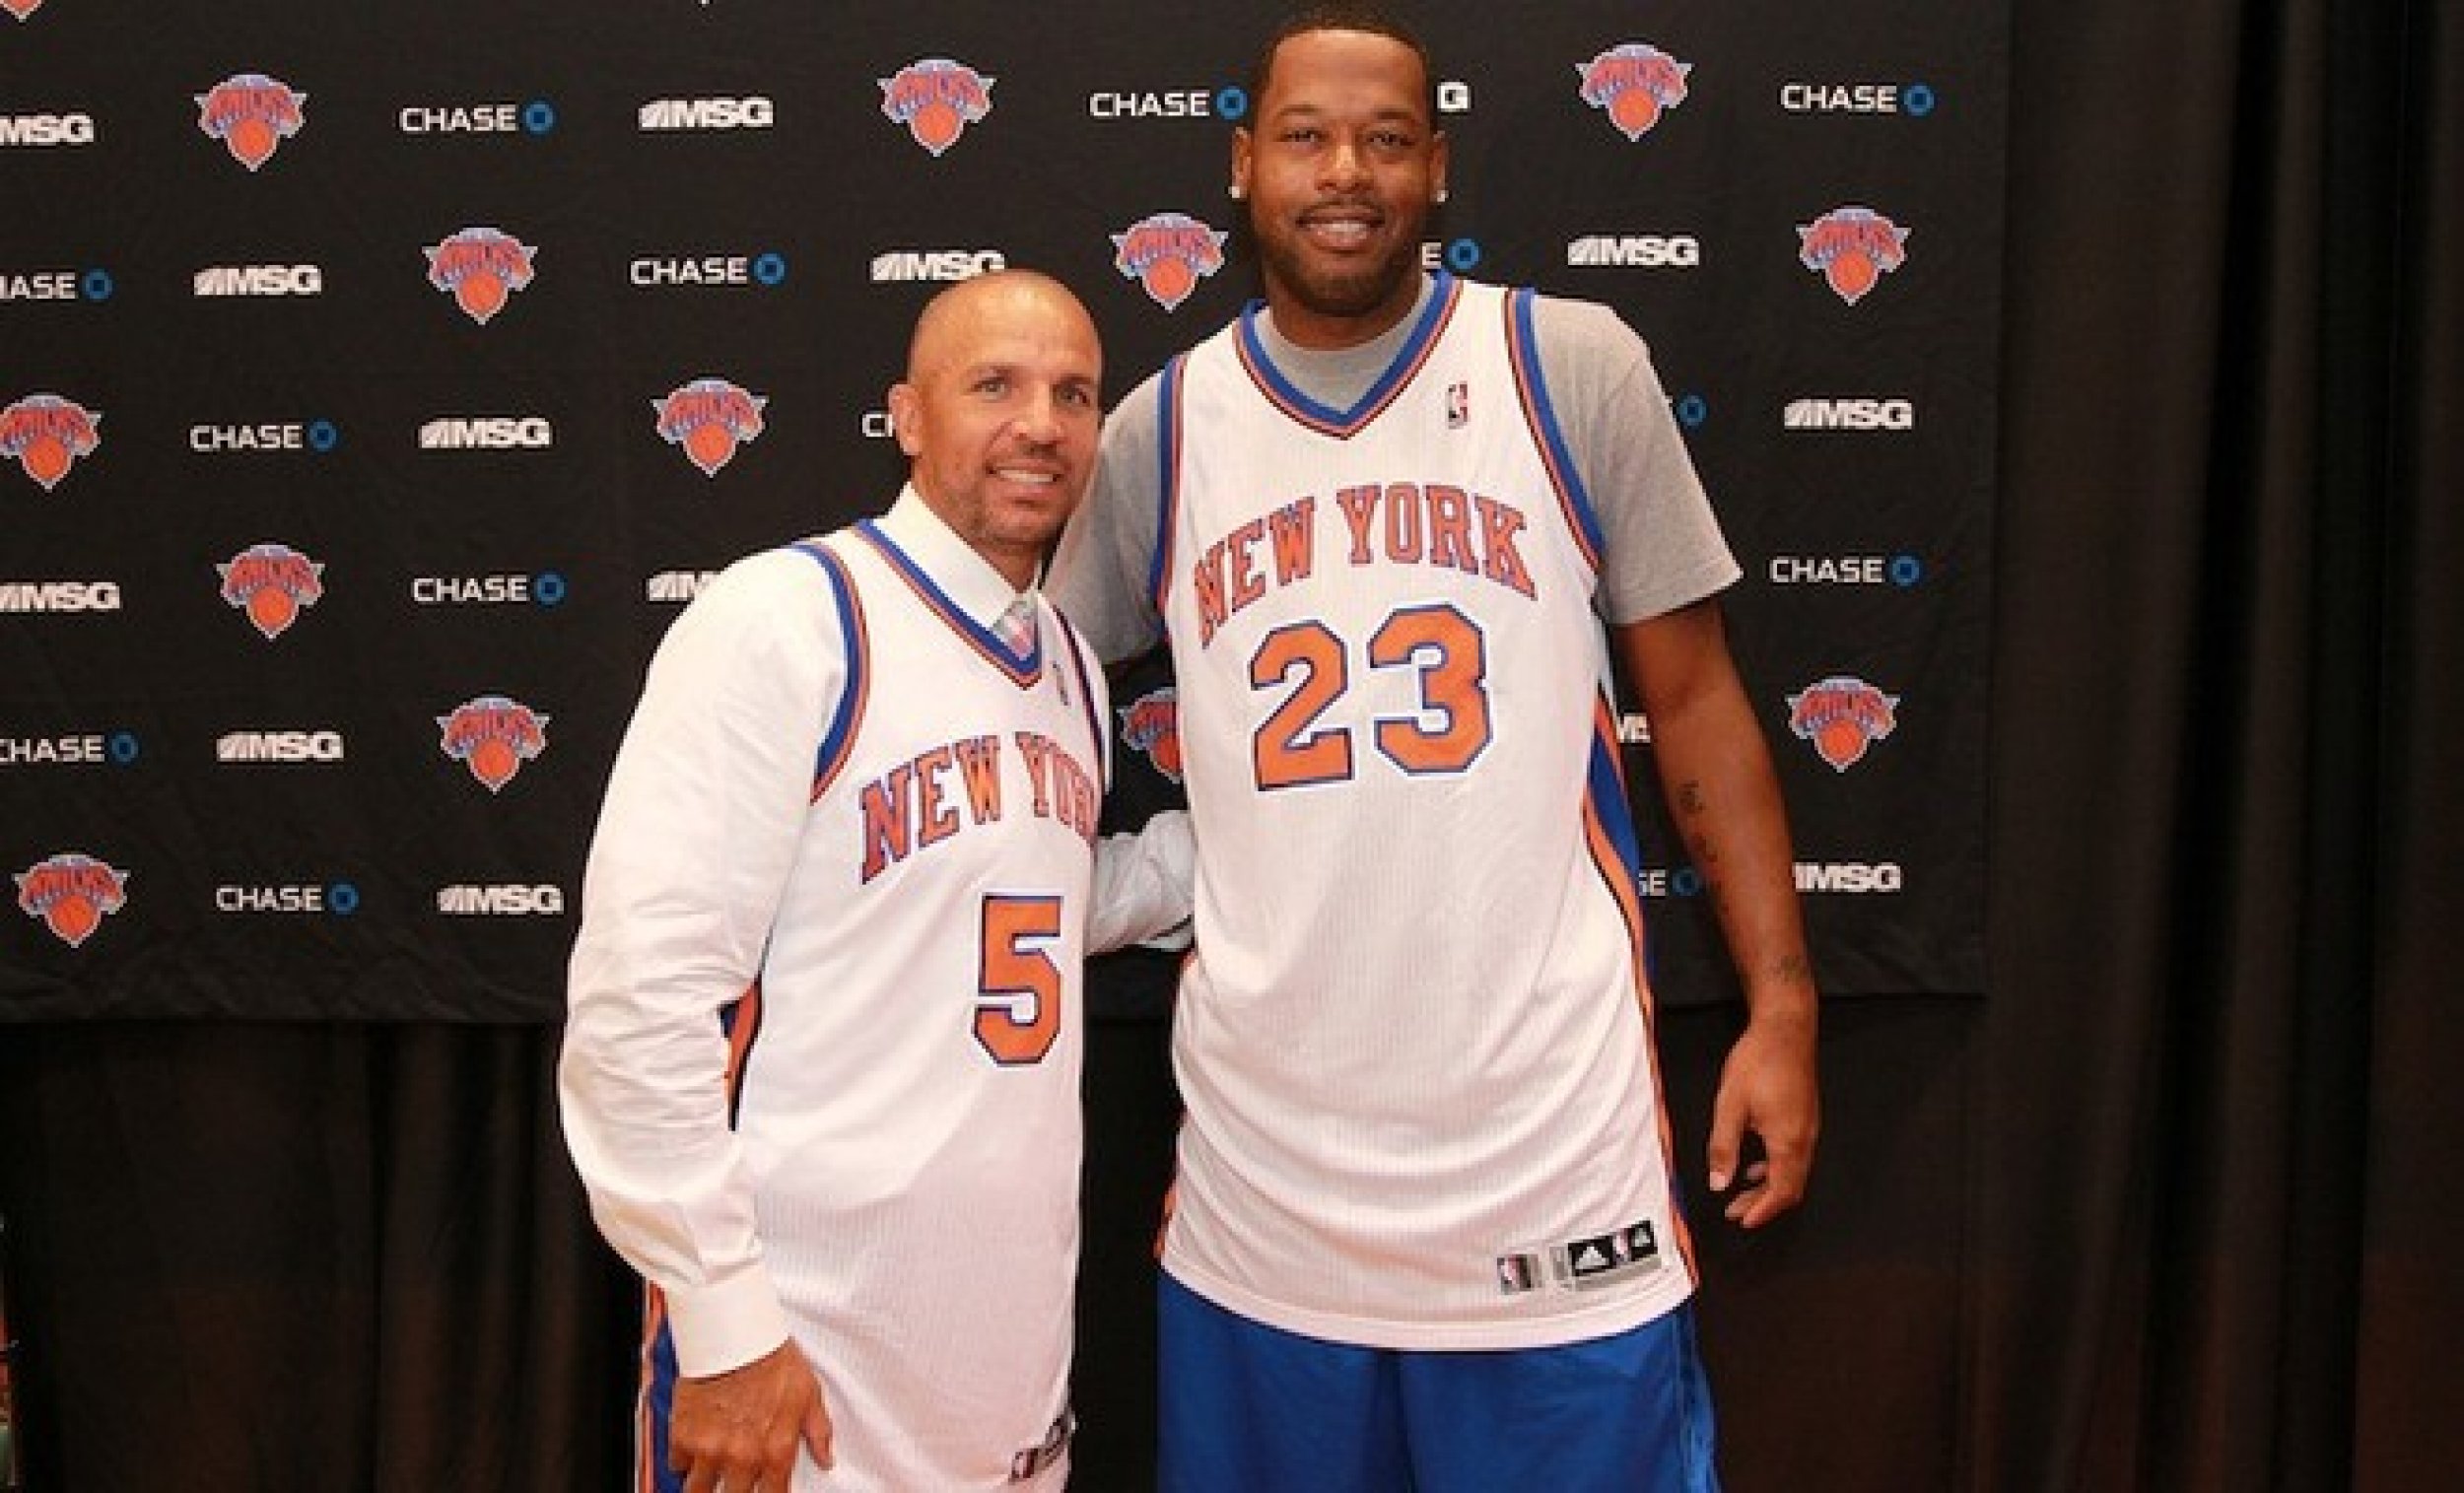 Jason Kidd l. and Marcus Camby